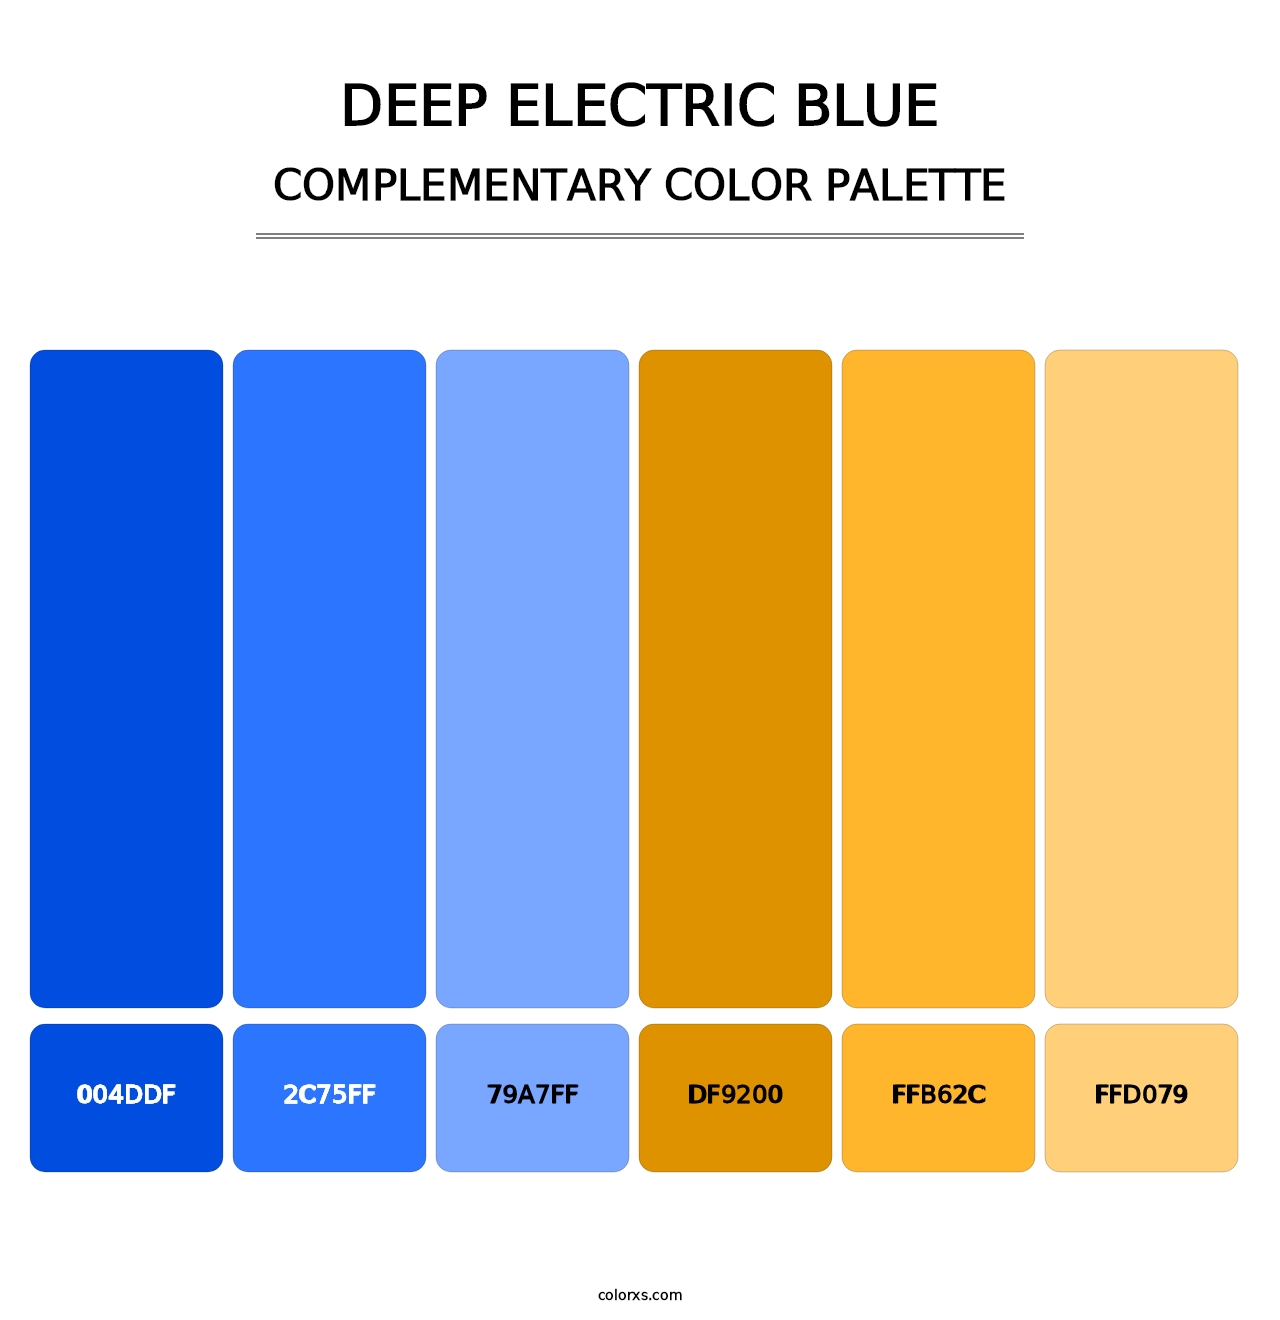 Deep Electric Blue - Complementary Color Palette